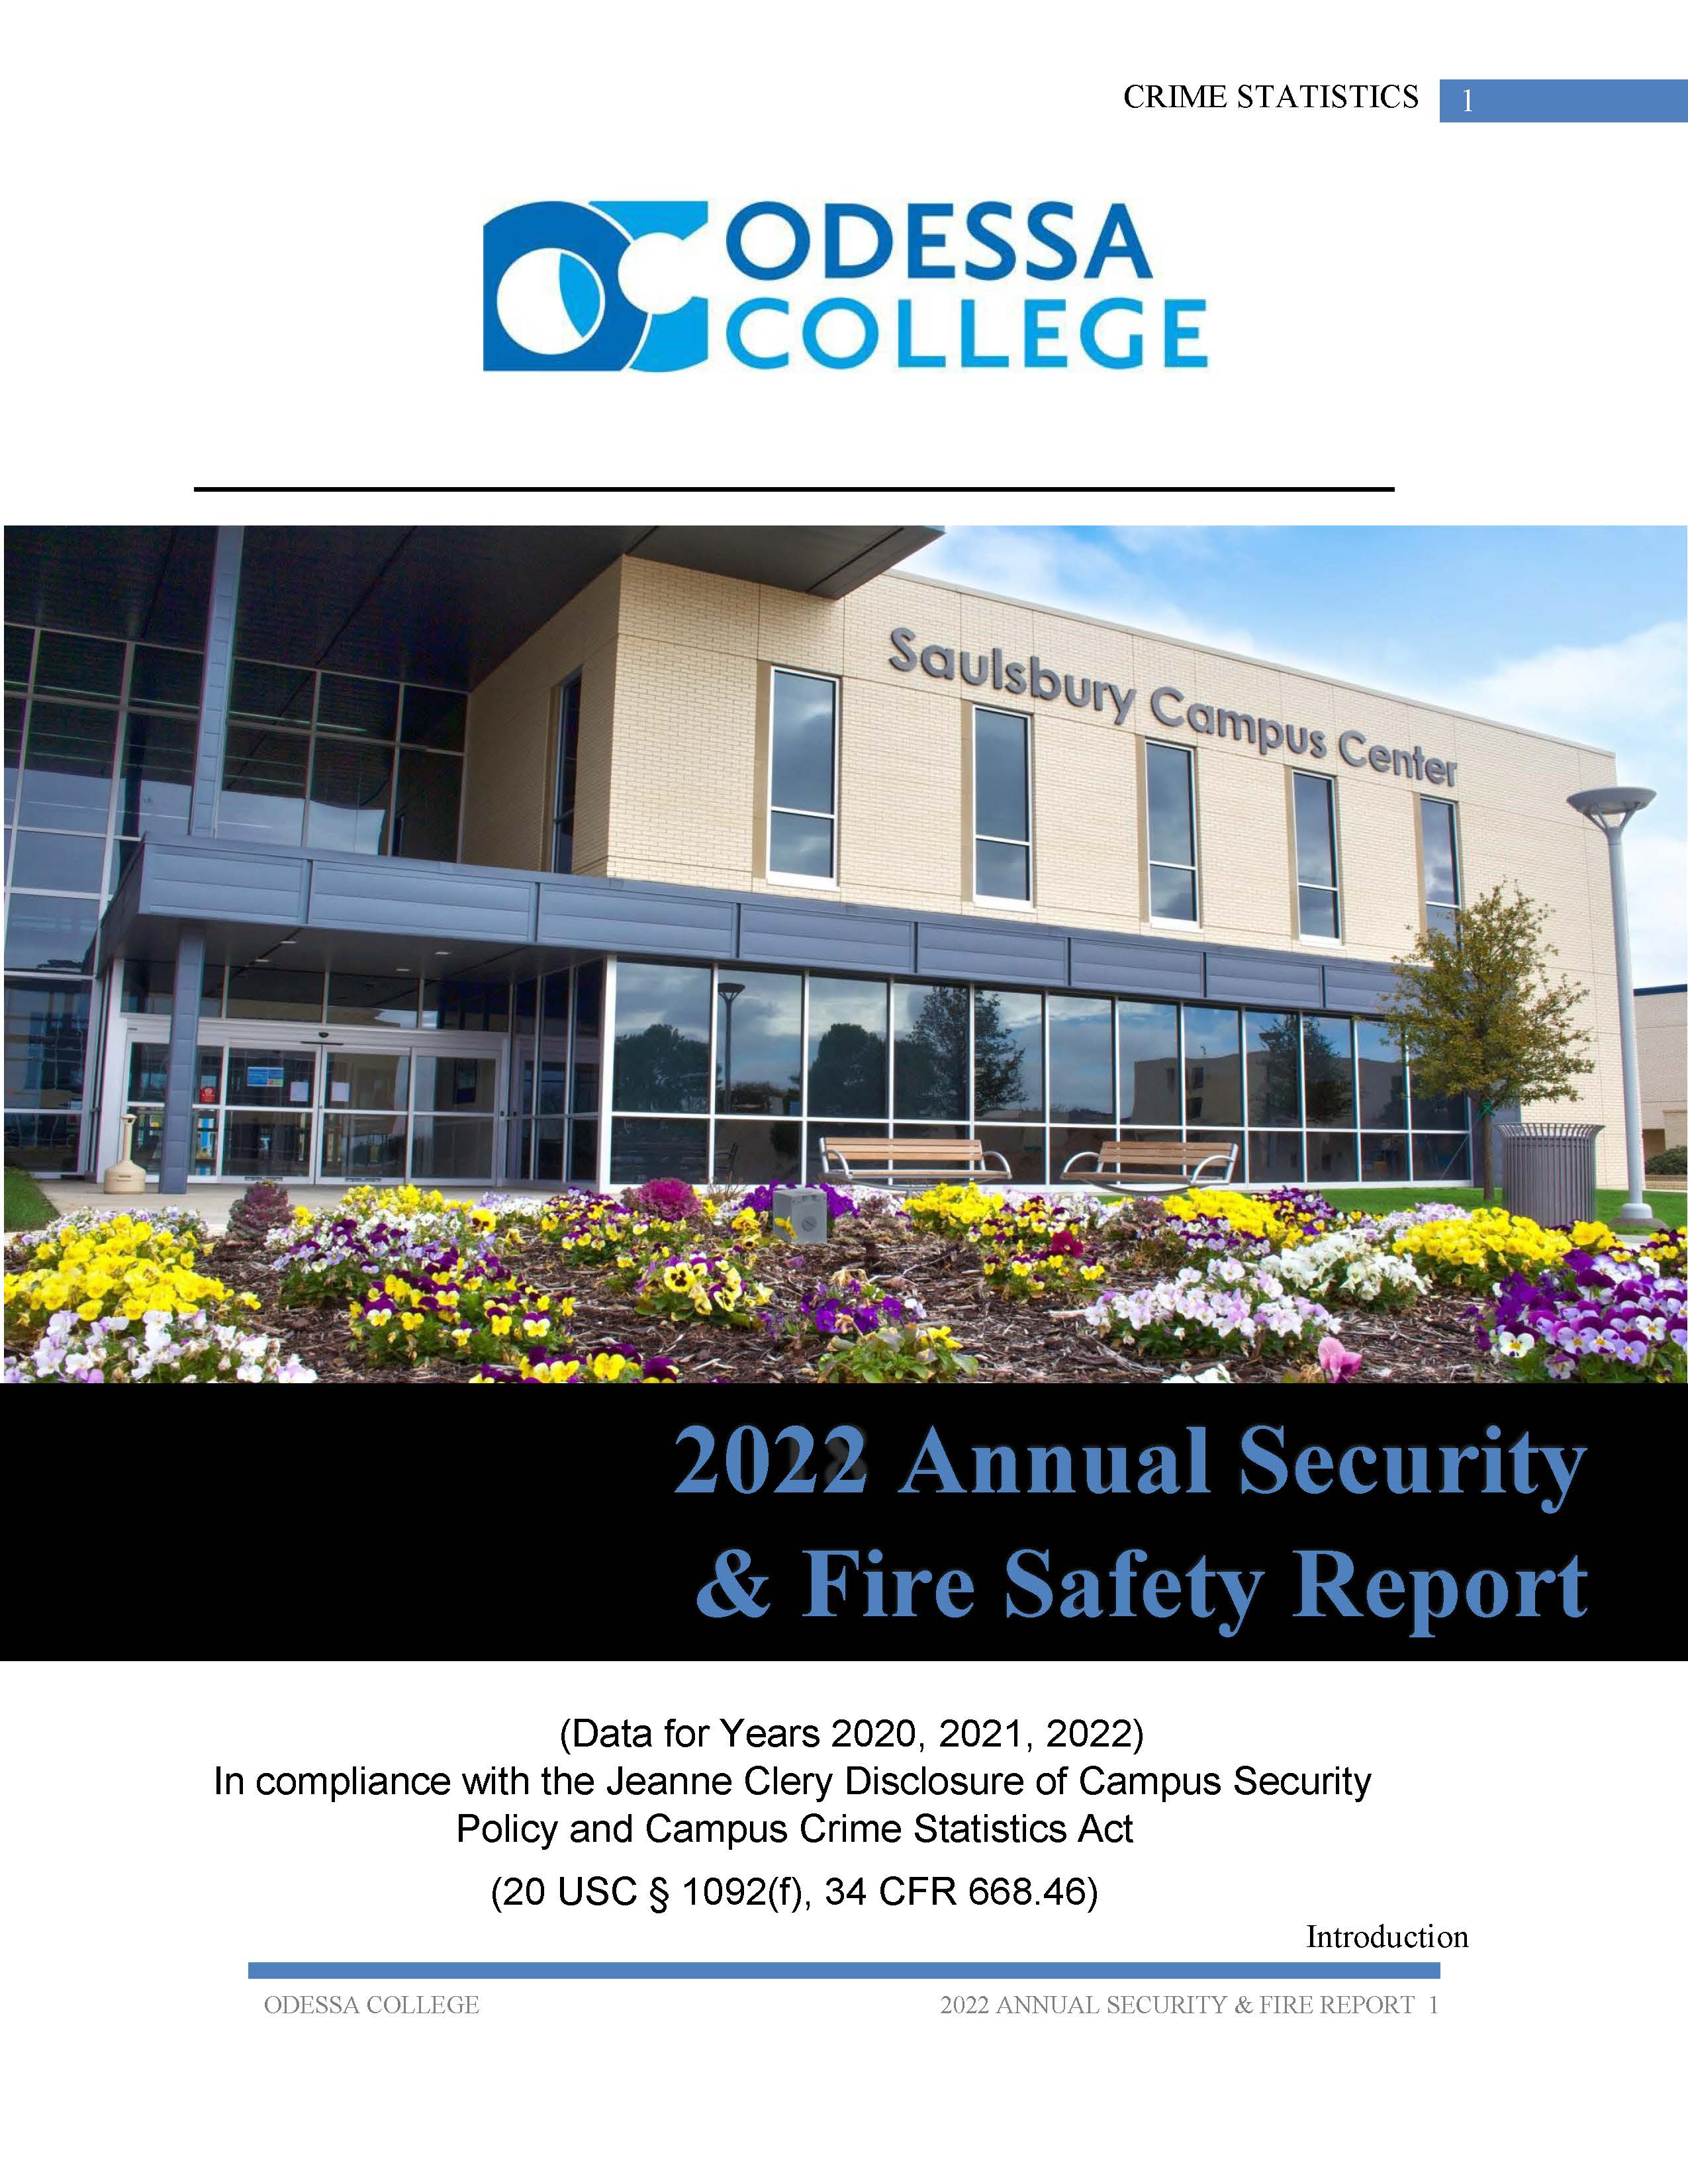 OC Annual Security Fire Report 2022 Cover